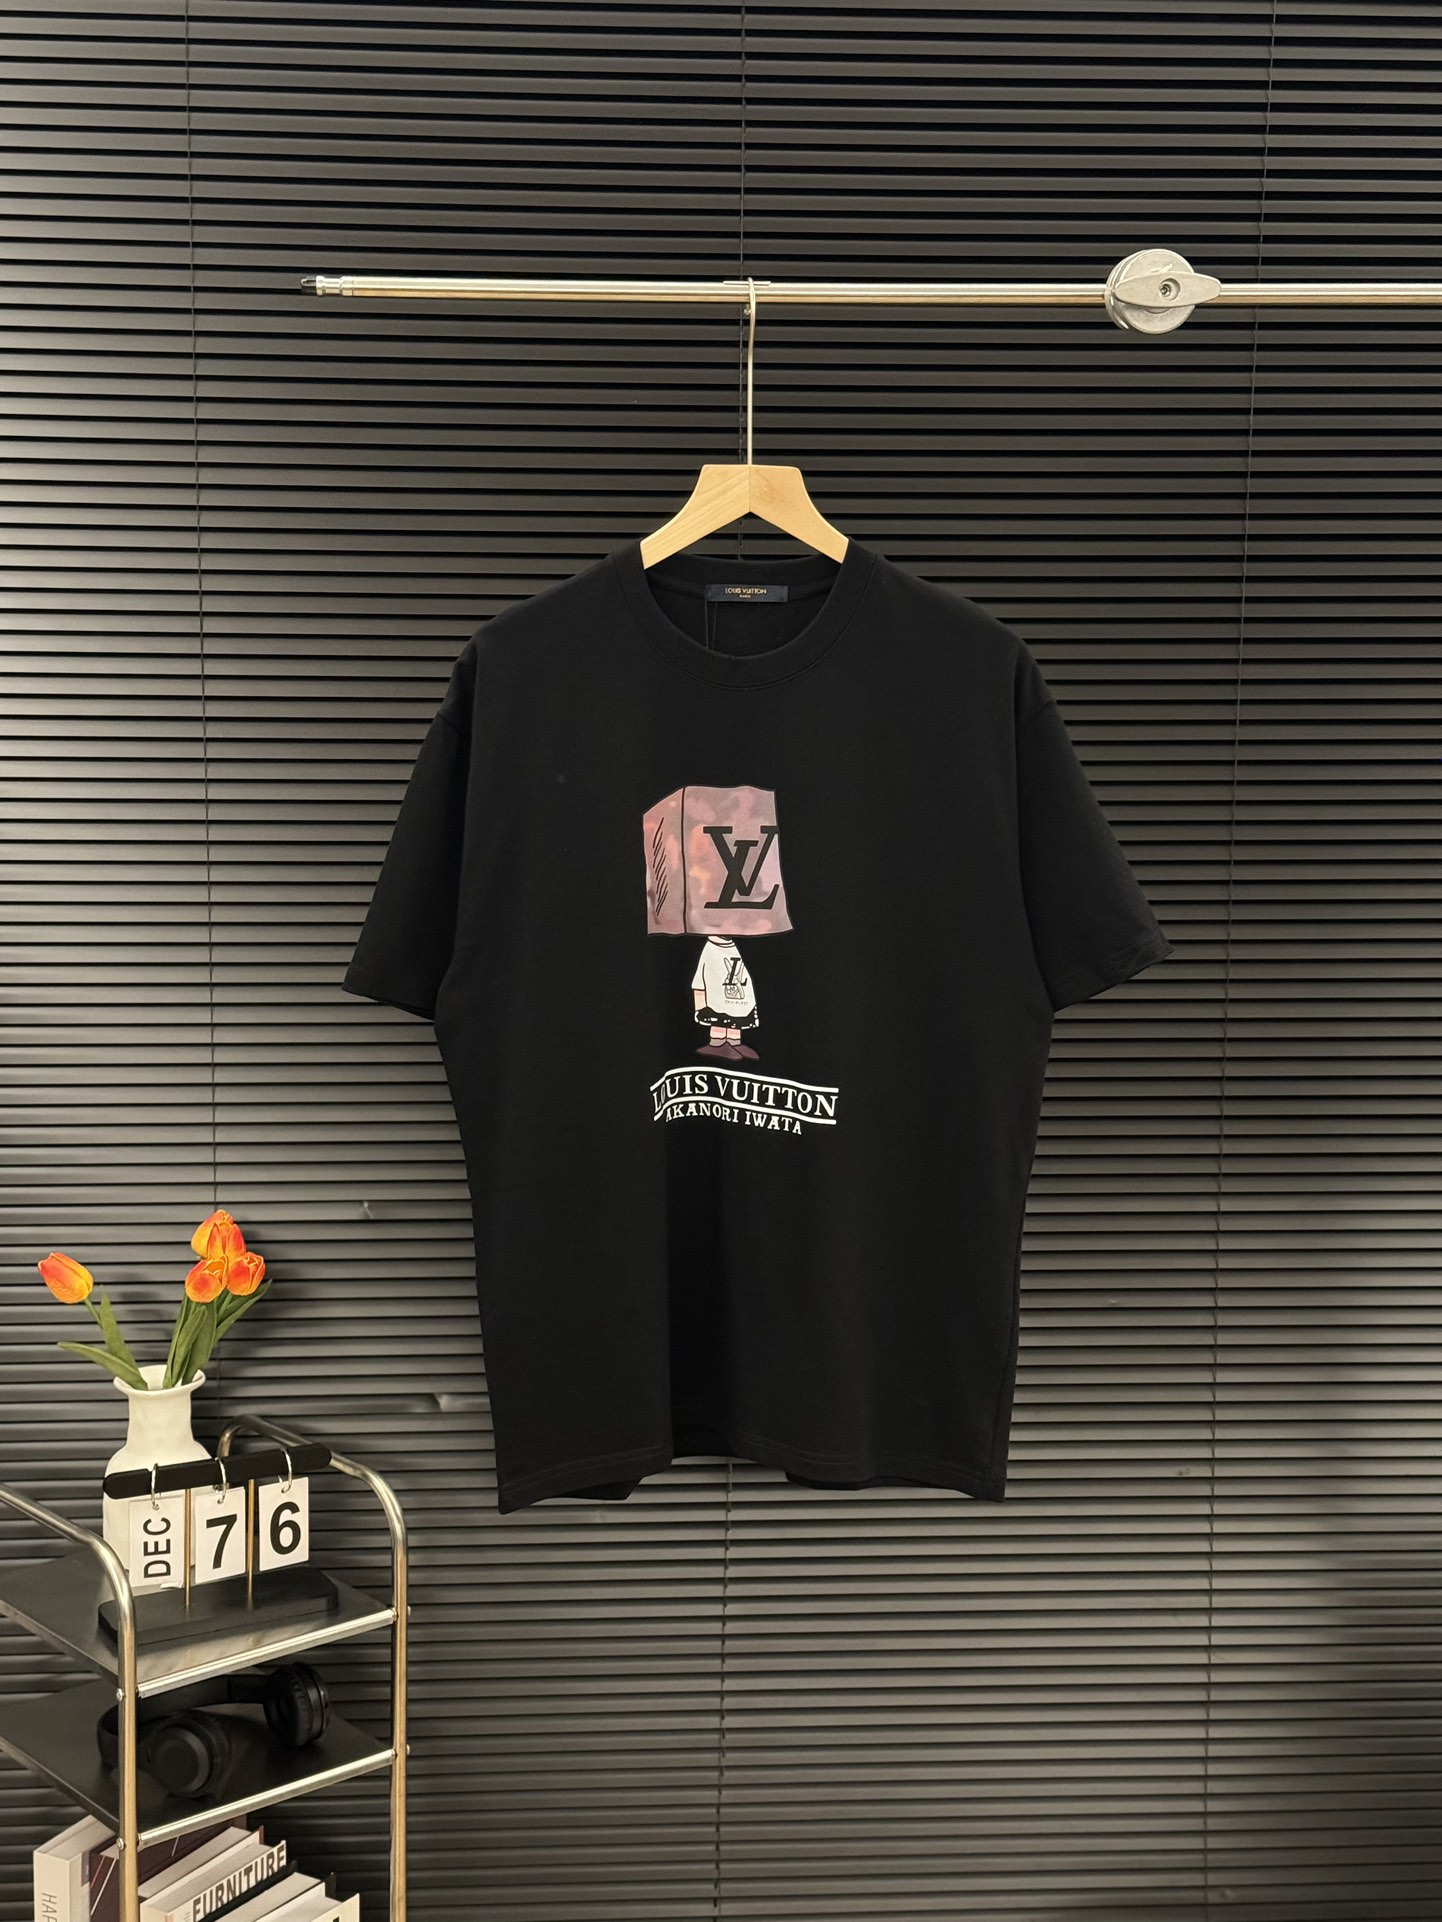 Louis Vuitton Clothing T-Shirt Good Quality Replica
 Black Pink White Printing Unisex Summer Collection Fashion Short Sleeve